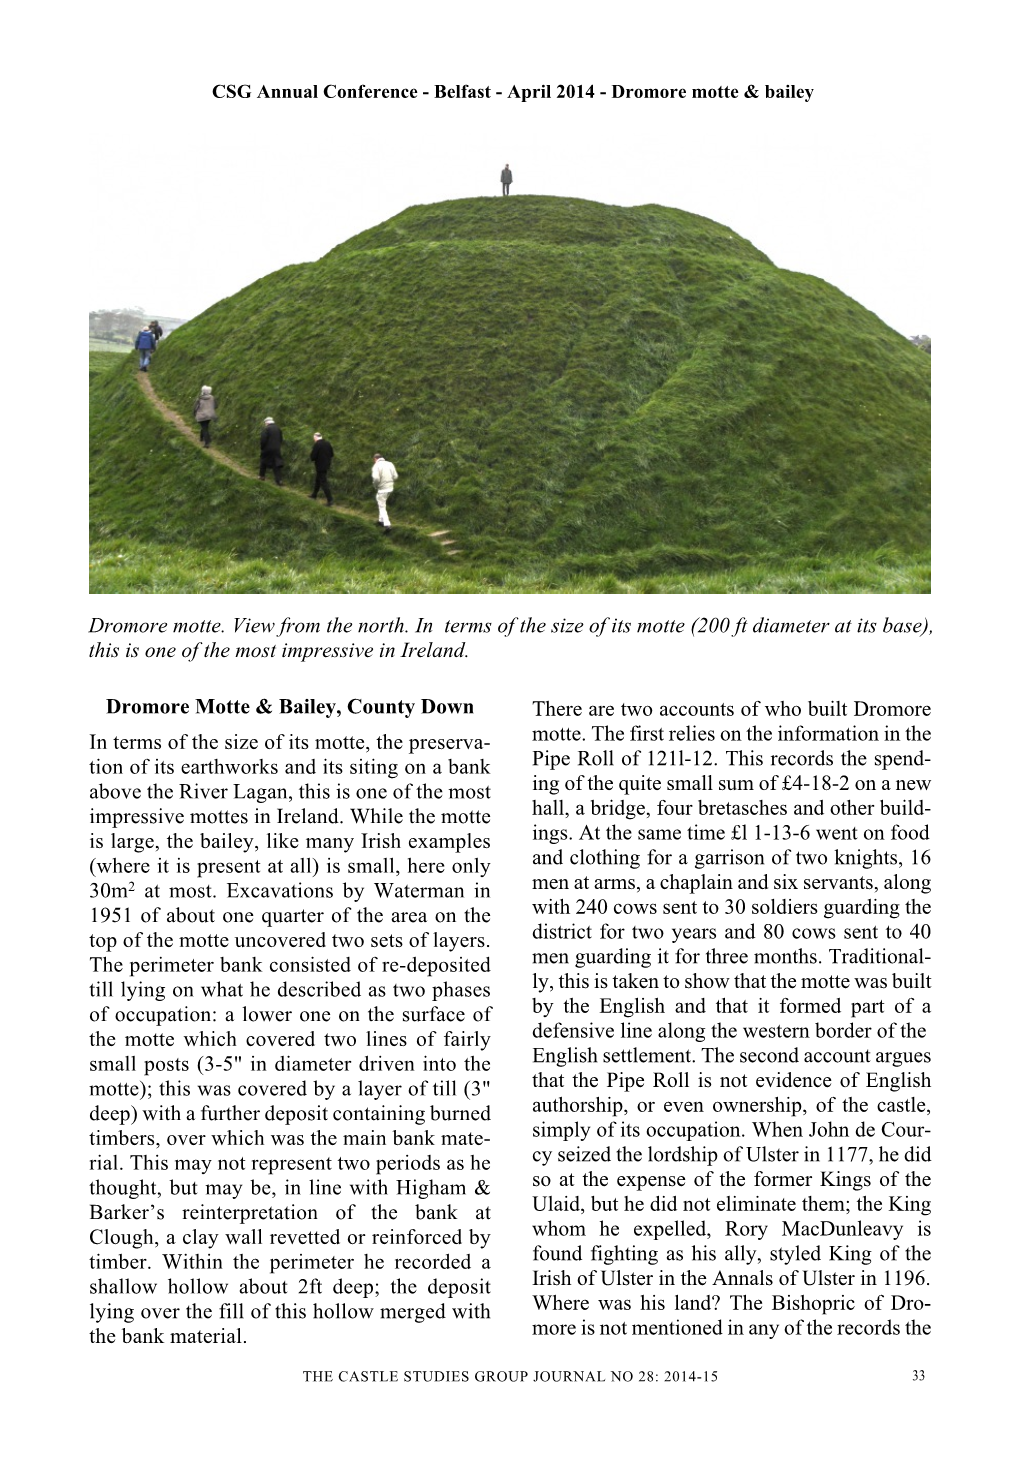 Dromore Motte & Bailey, County Down in Terms of the Size of Its Motte, The